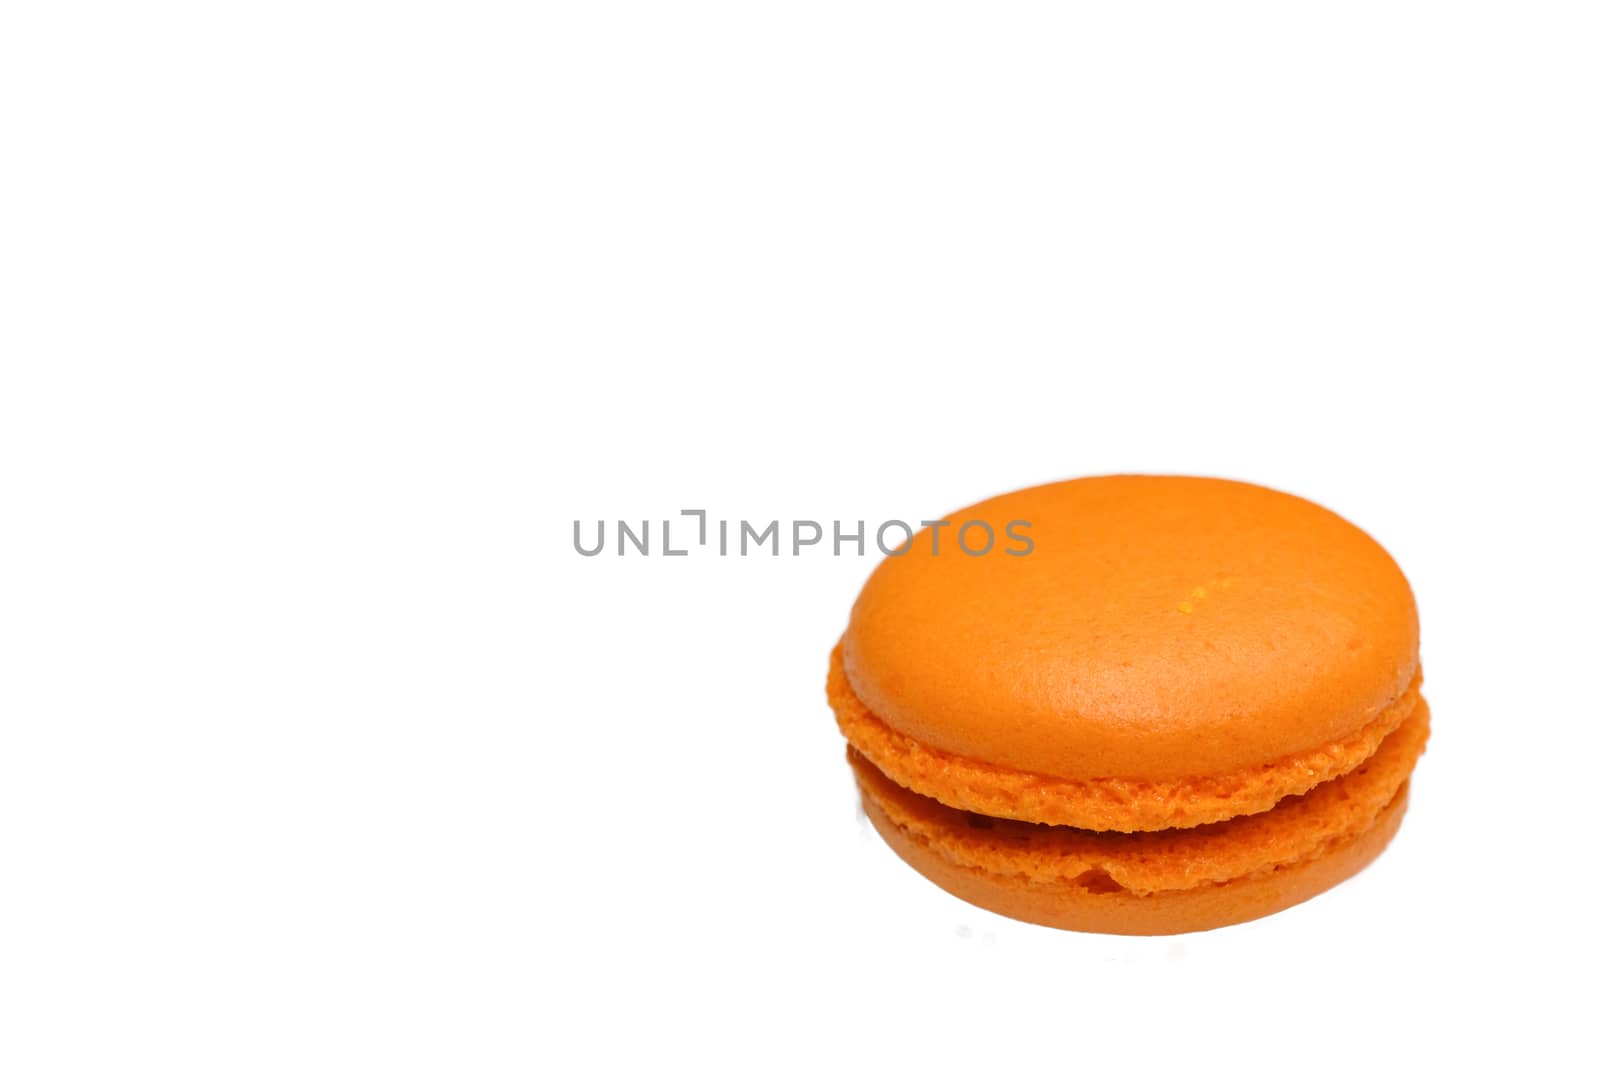 an orange flavored macaroon with chocolate filling, macro top view clean minimal style, isolated on white background